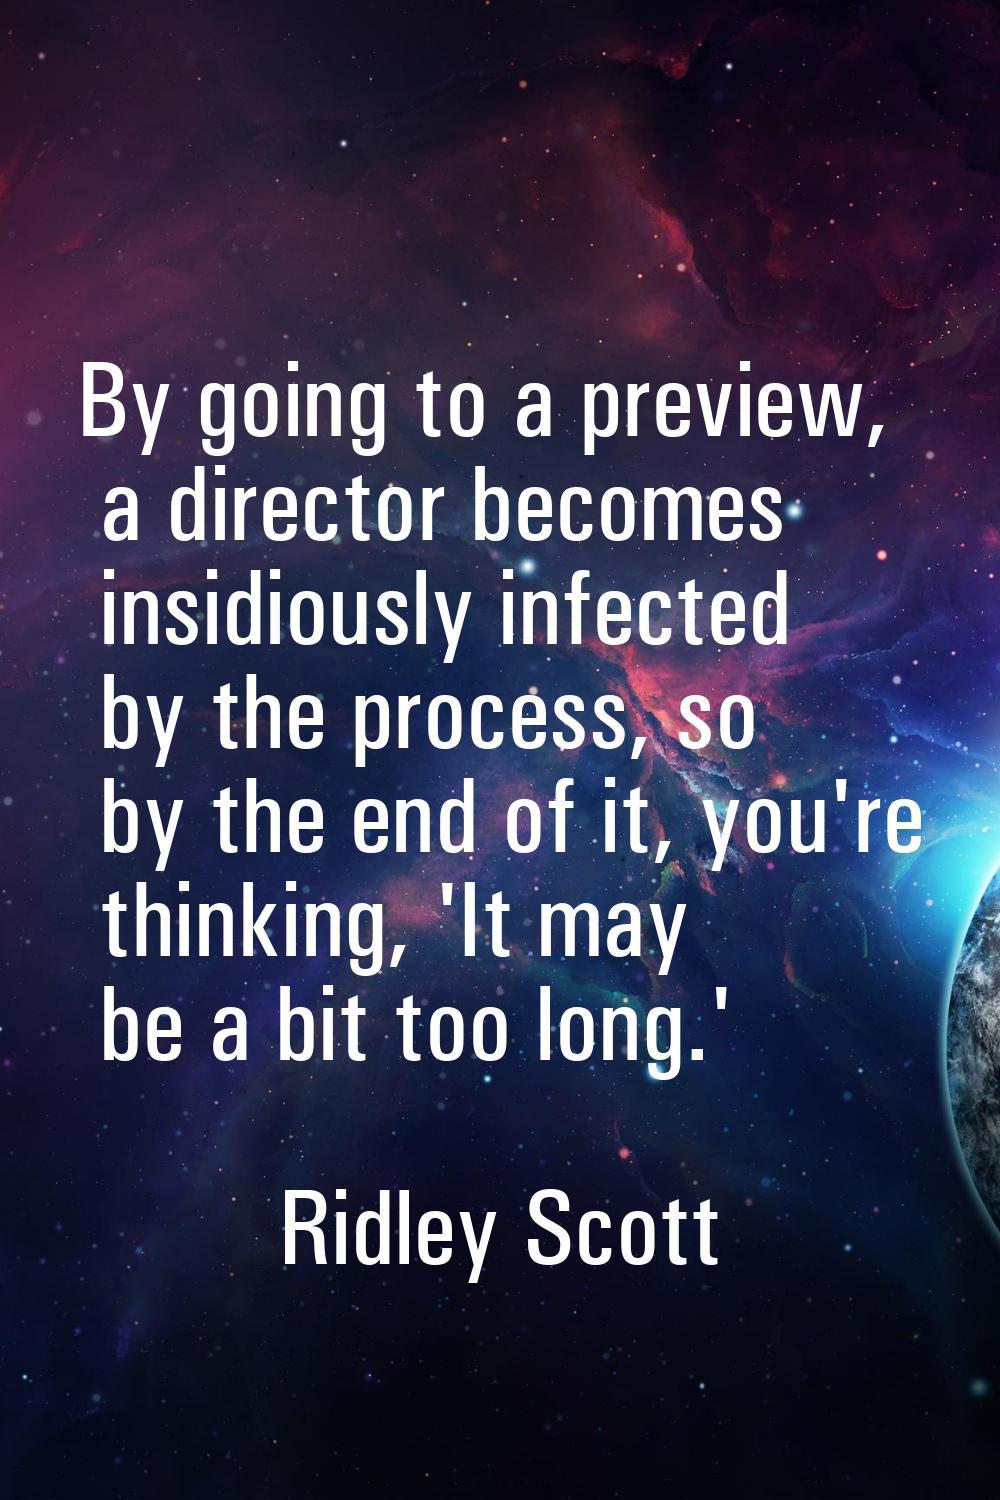 By going to a preview, a director becomes insidiously infected by the process, so by the end of it,